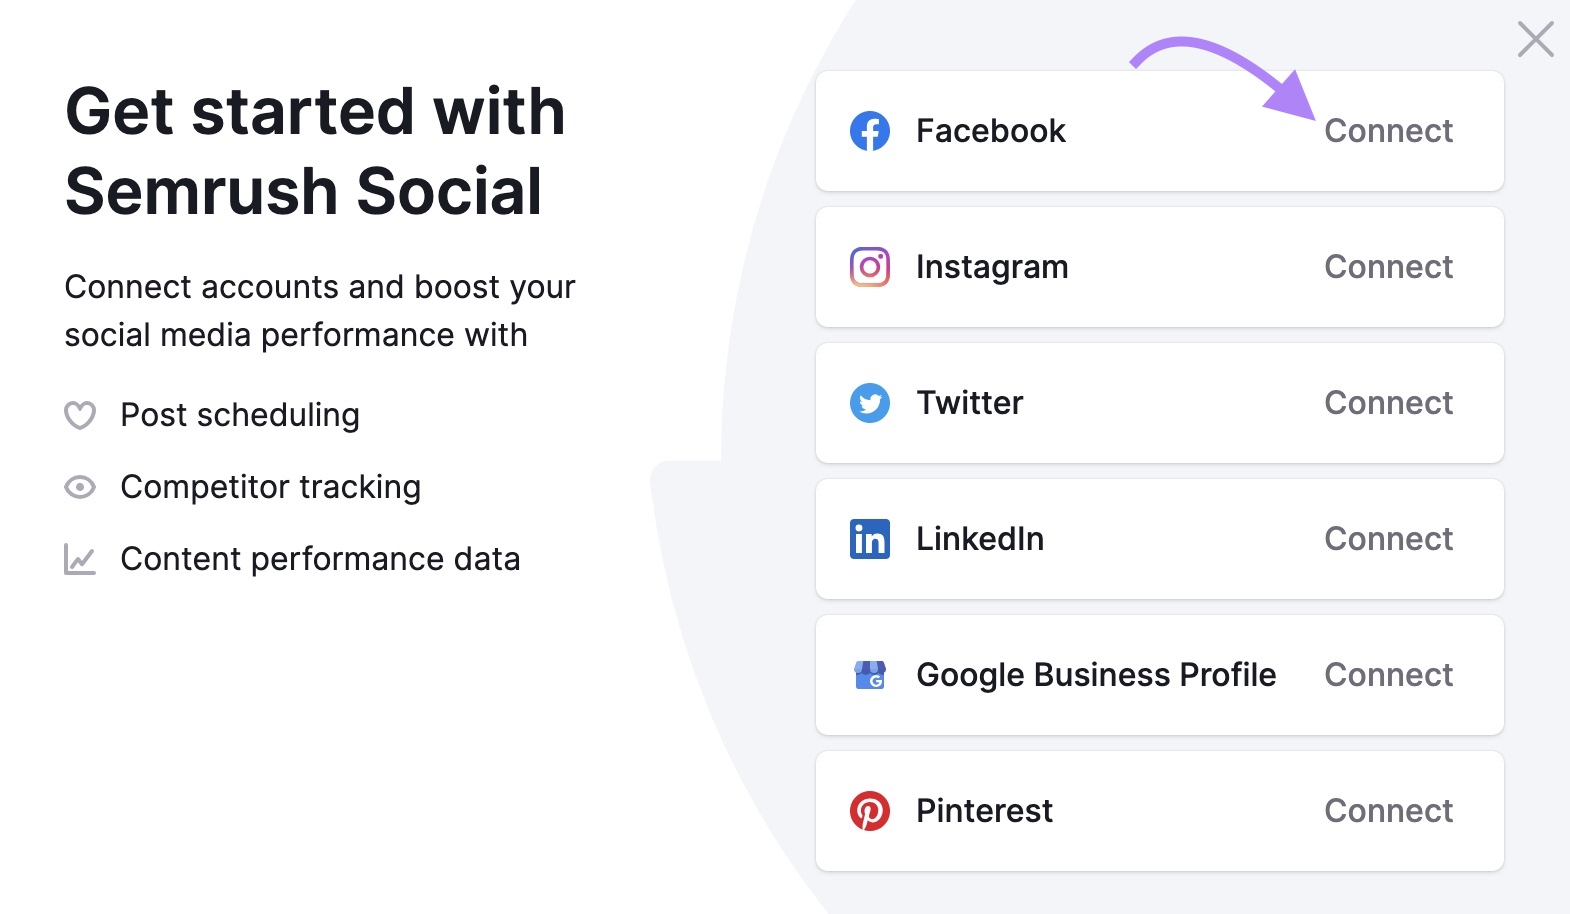 "Get Started with Semrush Social" page with a list of social media channels you can connect and "Facebook" clicked.